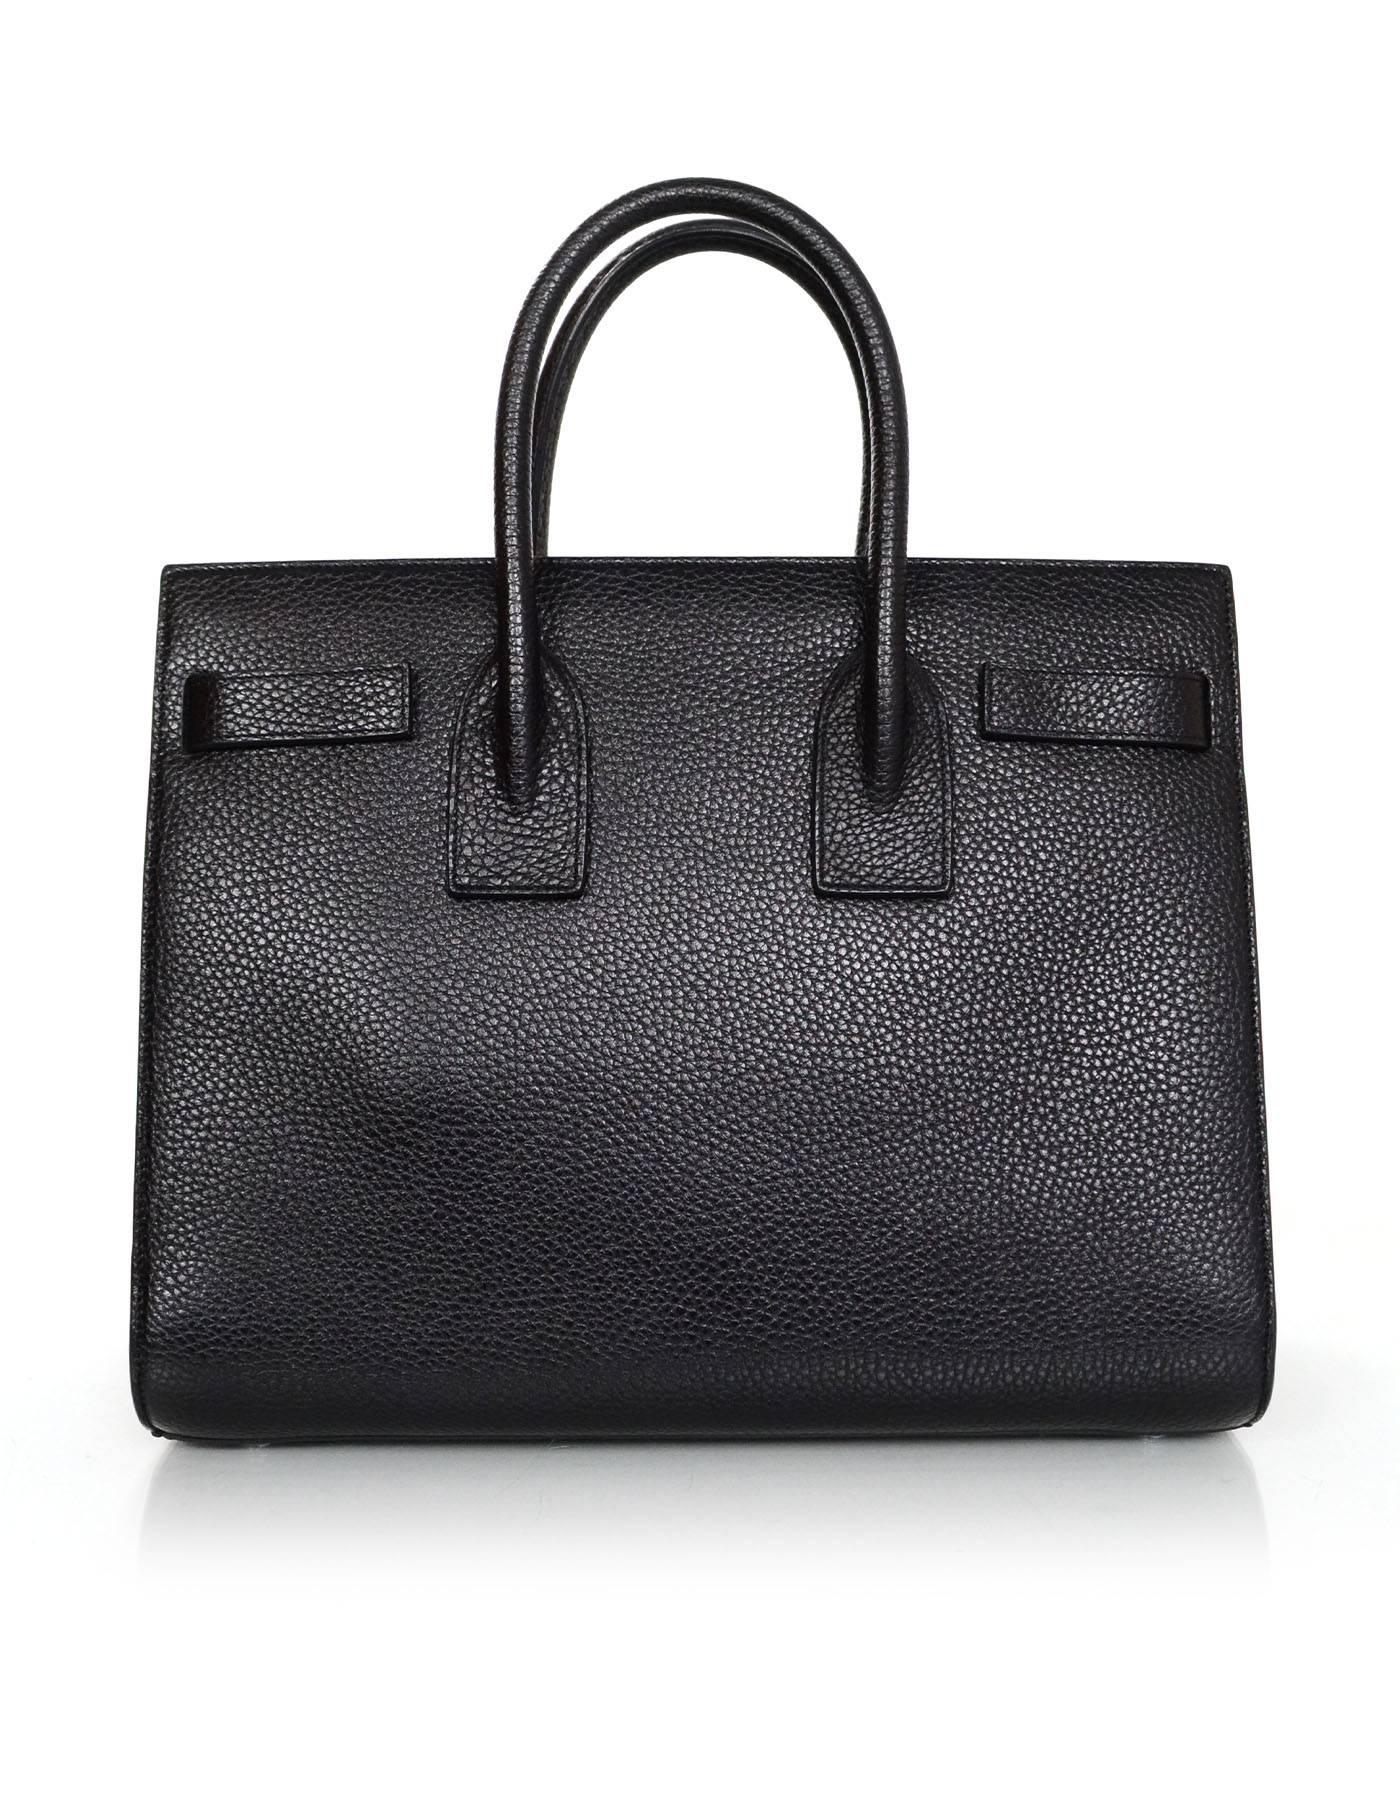 100% Authentic Saint Laurent Black Grained Calfskin Small Sac De Jour. Features accordion sides, embossed Saint Laurent signature on front of bag, and removable strap.

Made In: Italy
Color: Black
Hardware: Silvertone
Materials: Grained calfskin